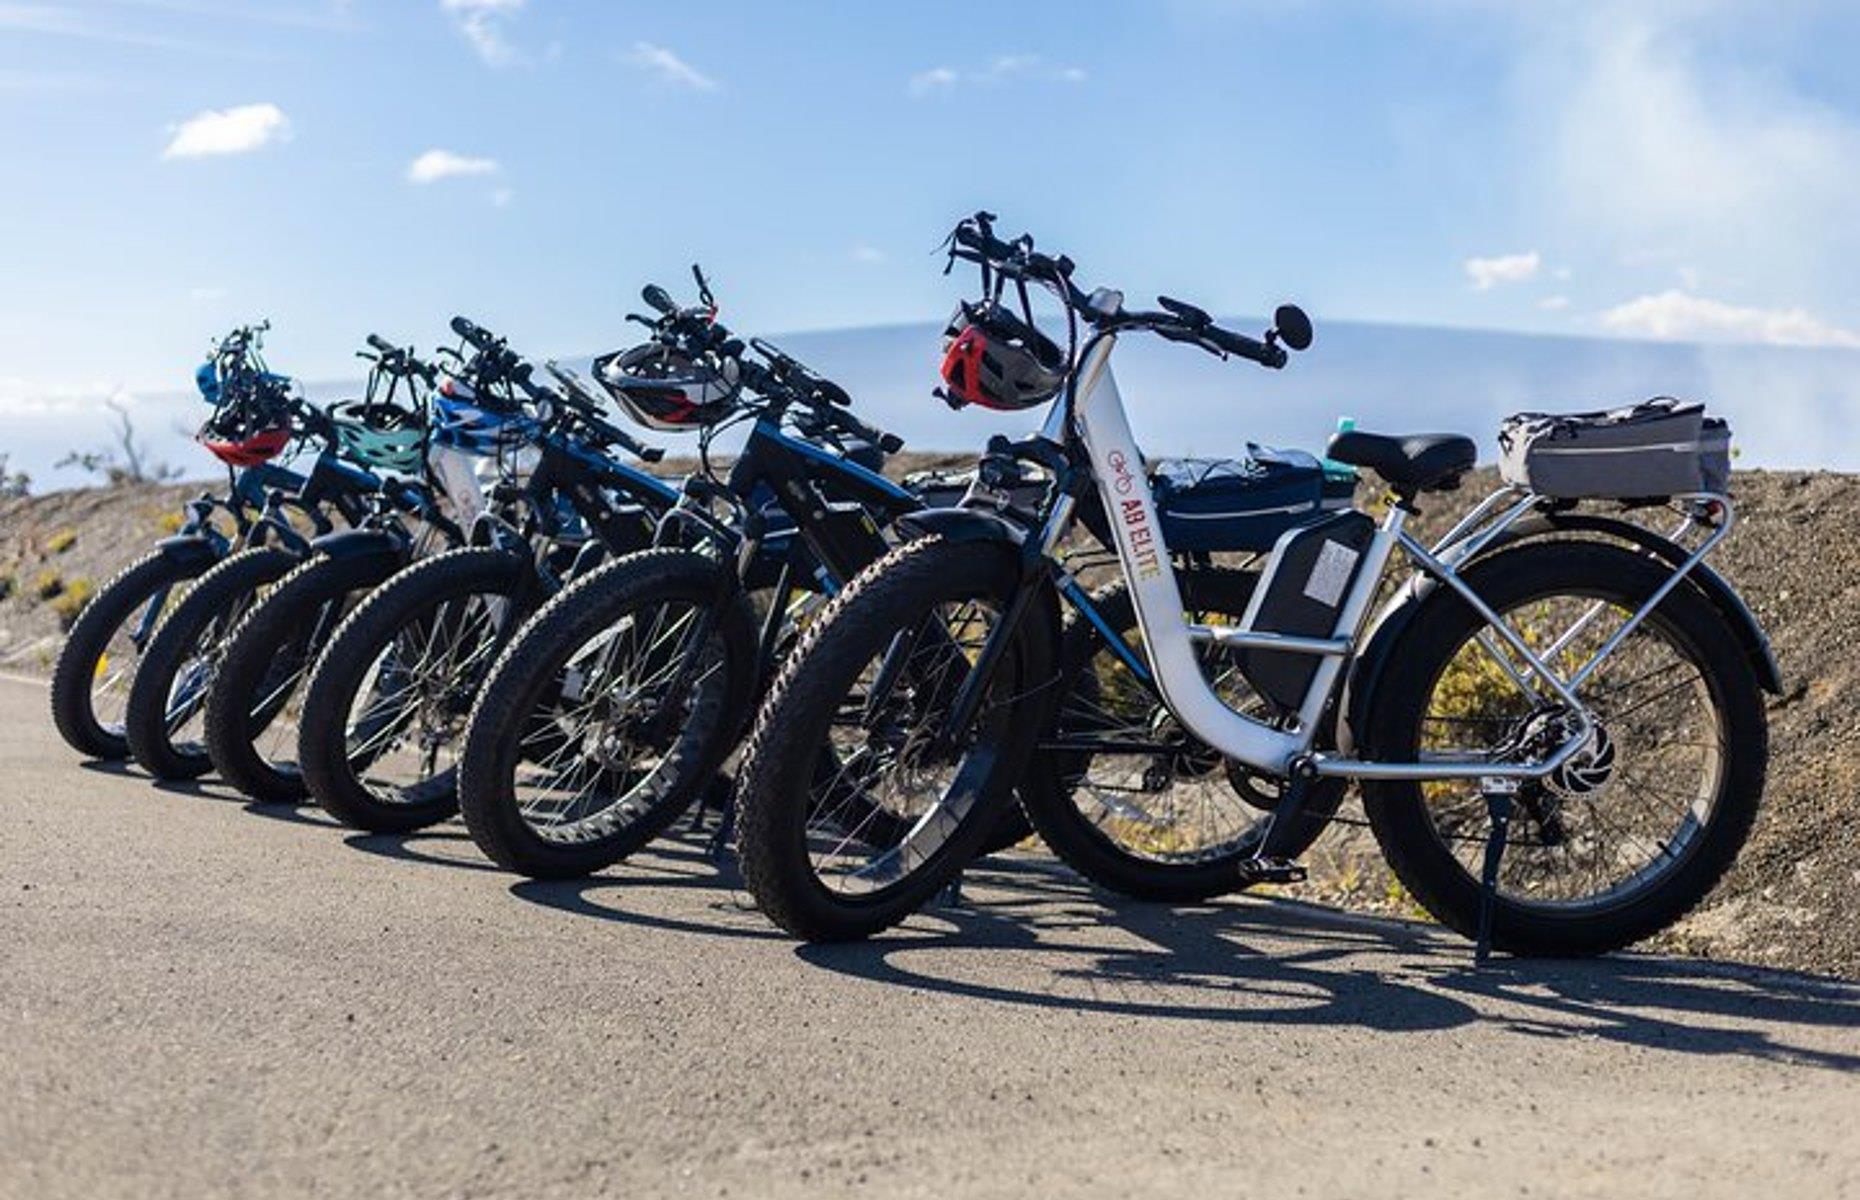 <p>Covering more than 500 square miles (1,295sq km) of Hawaii’s Big Island, including two active volcanoes (Kīlauea and Mauna Loa), Volcanoes National Park is jam-packed with awe-inspiring landscapes. And what better way to take them in than on an electric bike? <a href="https://volcanoohana.com/">Volcano Ohana</a> offers a three-hour experience on its trademark fat tire e-bikes, which are just the thing for navigating the region’s challenging volcanic terrain. </p>  <p><a href="http://bit.ly/3roL4wv"><strong>Love this? Follow our Facebook page for more travel inspiration</strong></a></p>